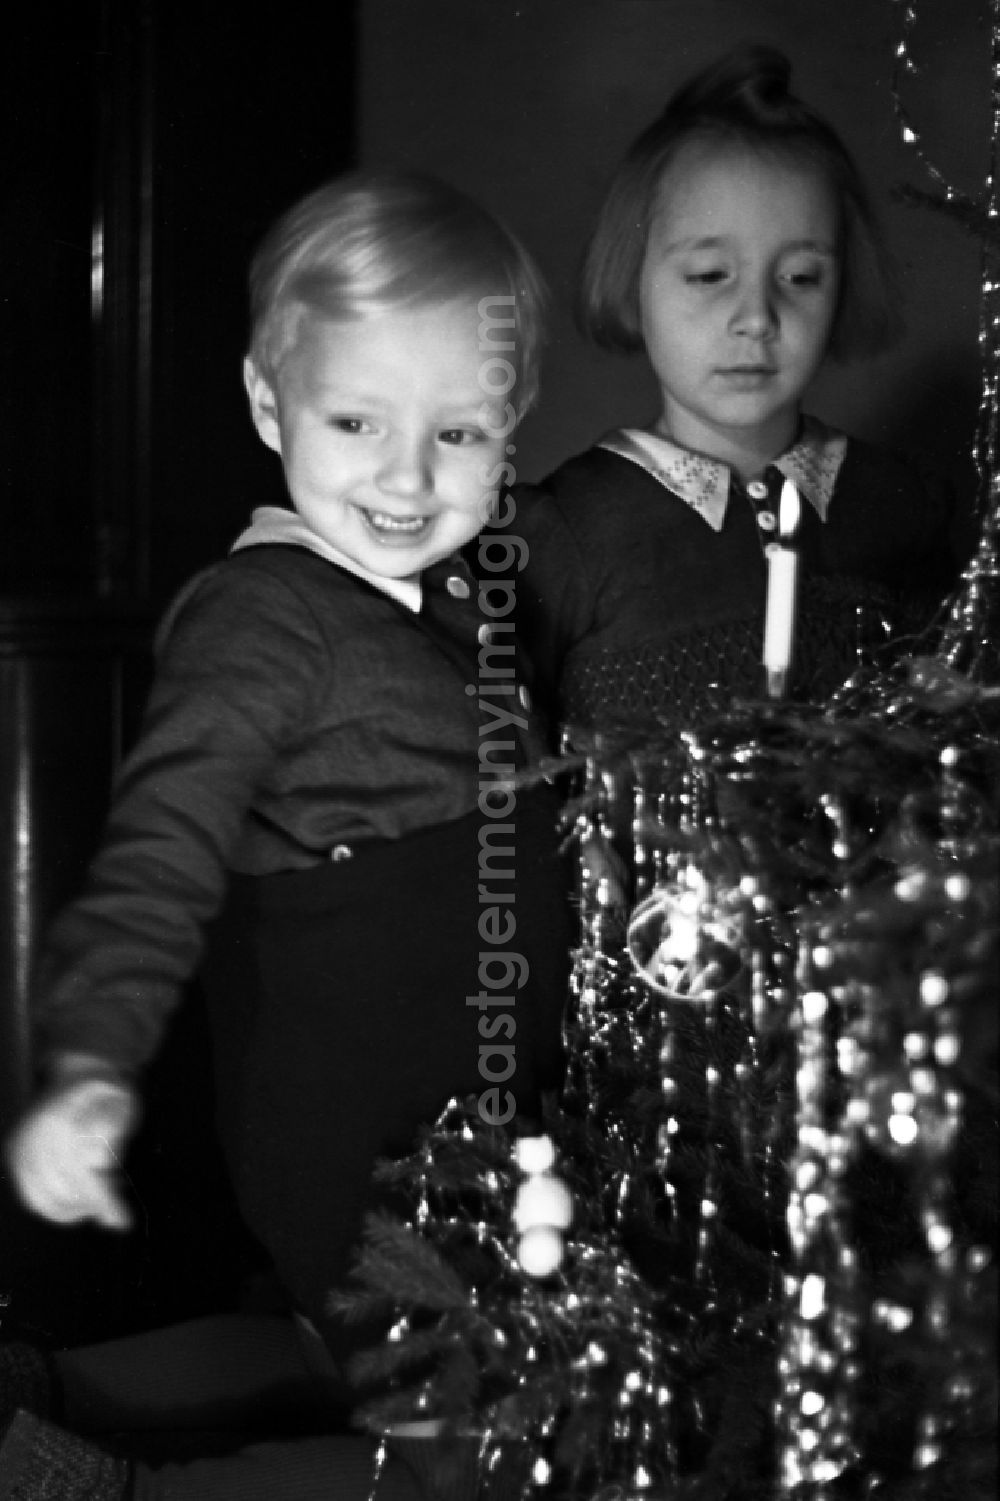 GDR image archive: Merseburg - Children stand beaming before the Christmas tree in Merseburg in the federal state Saxony-Anhalt in Germany